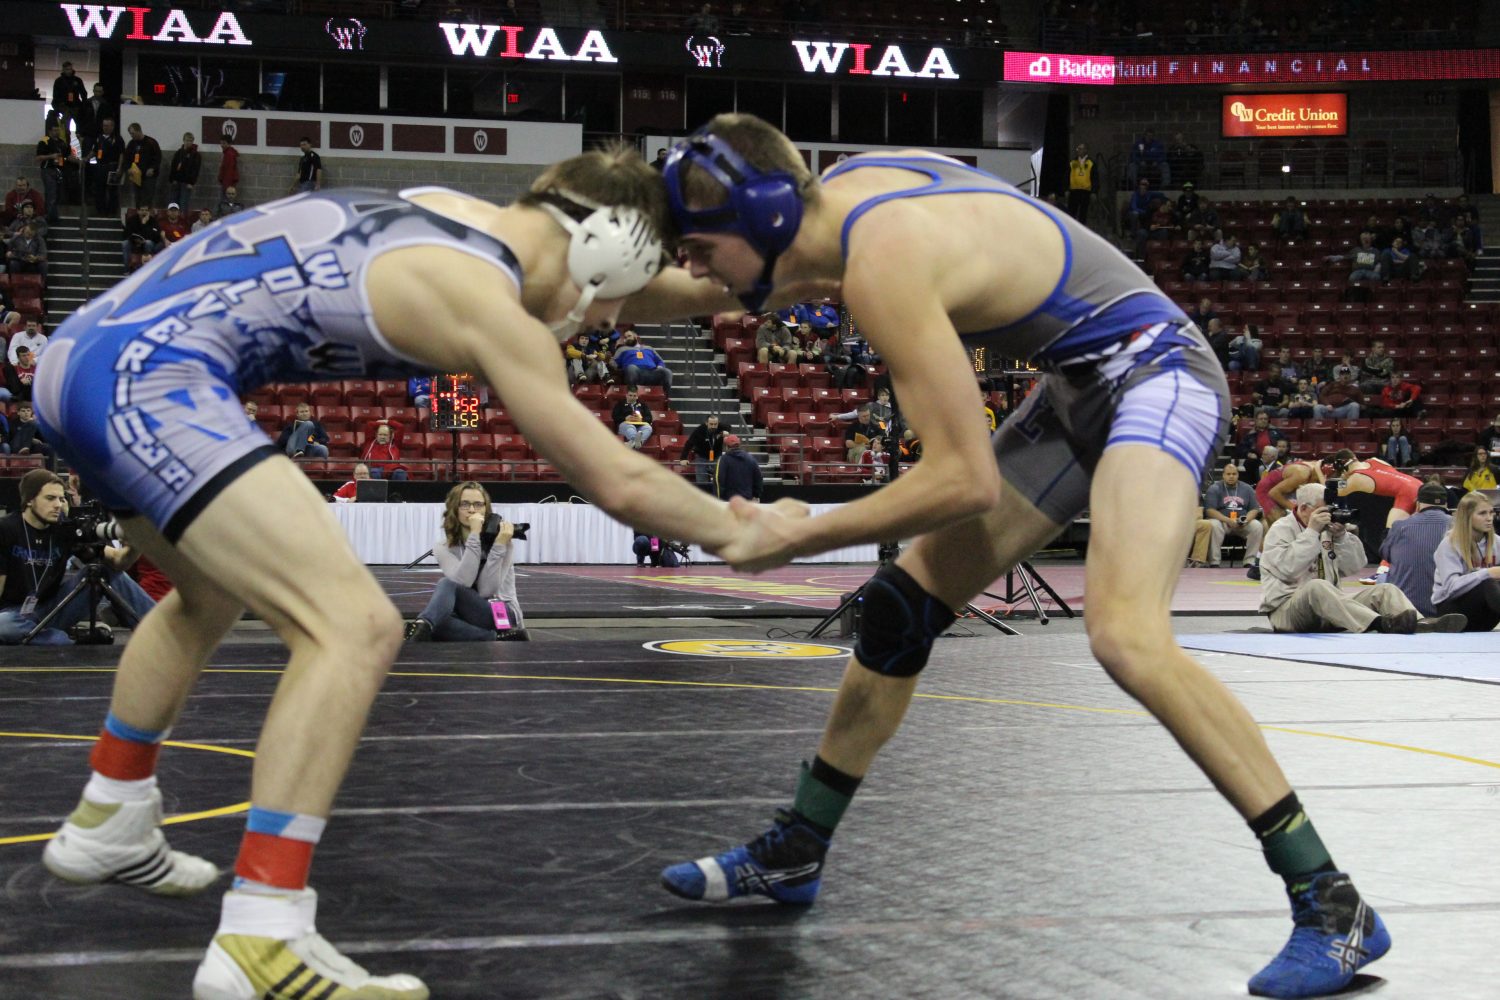 Wrestlers fall short at state